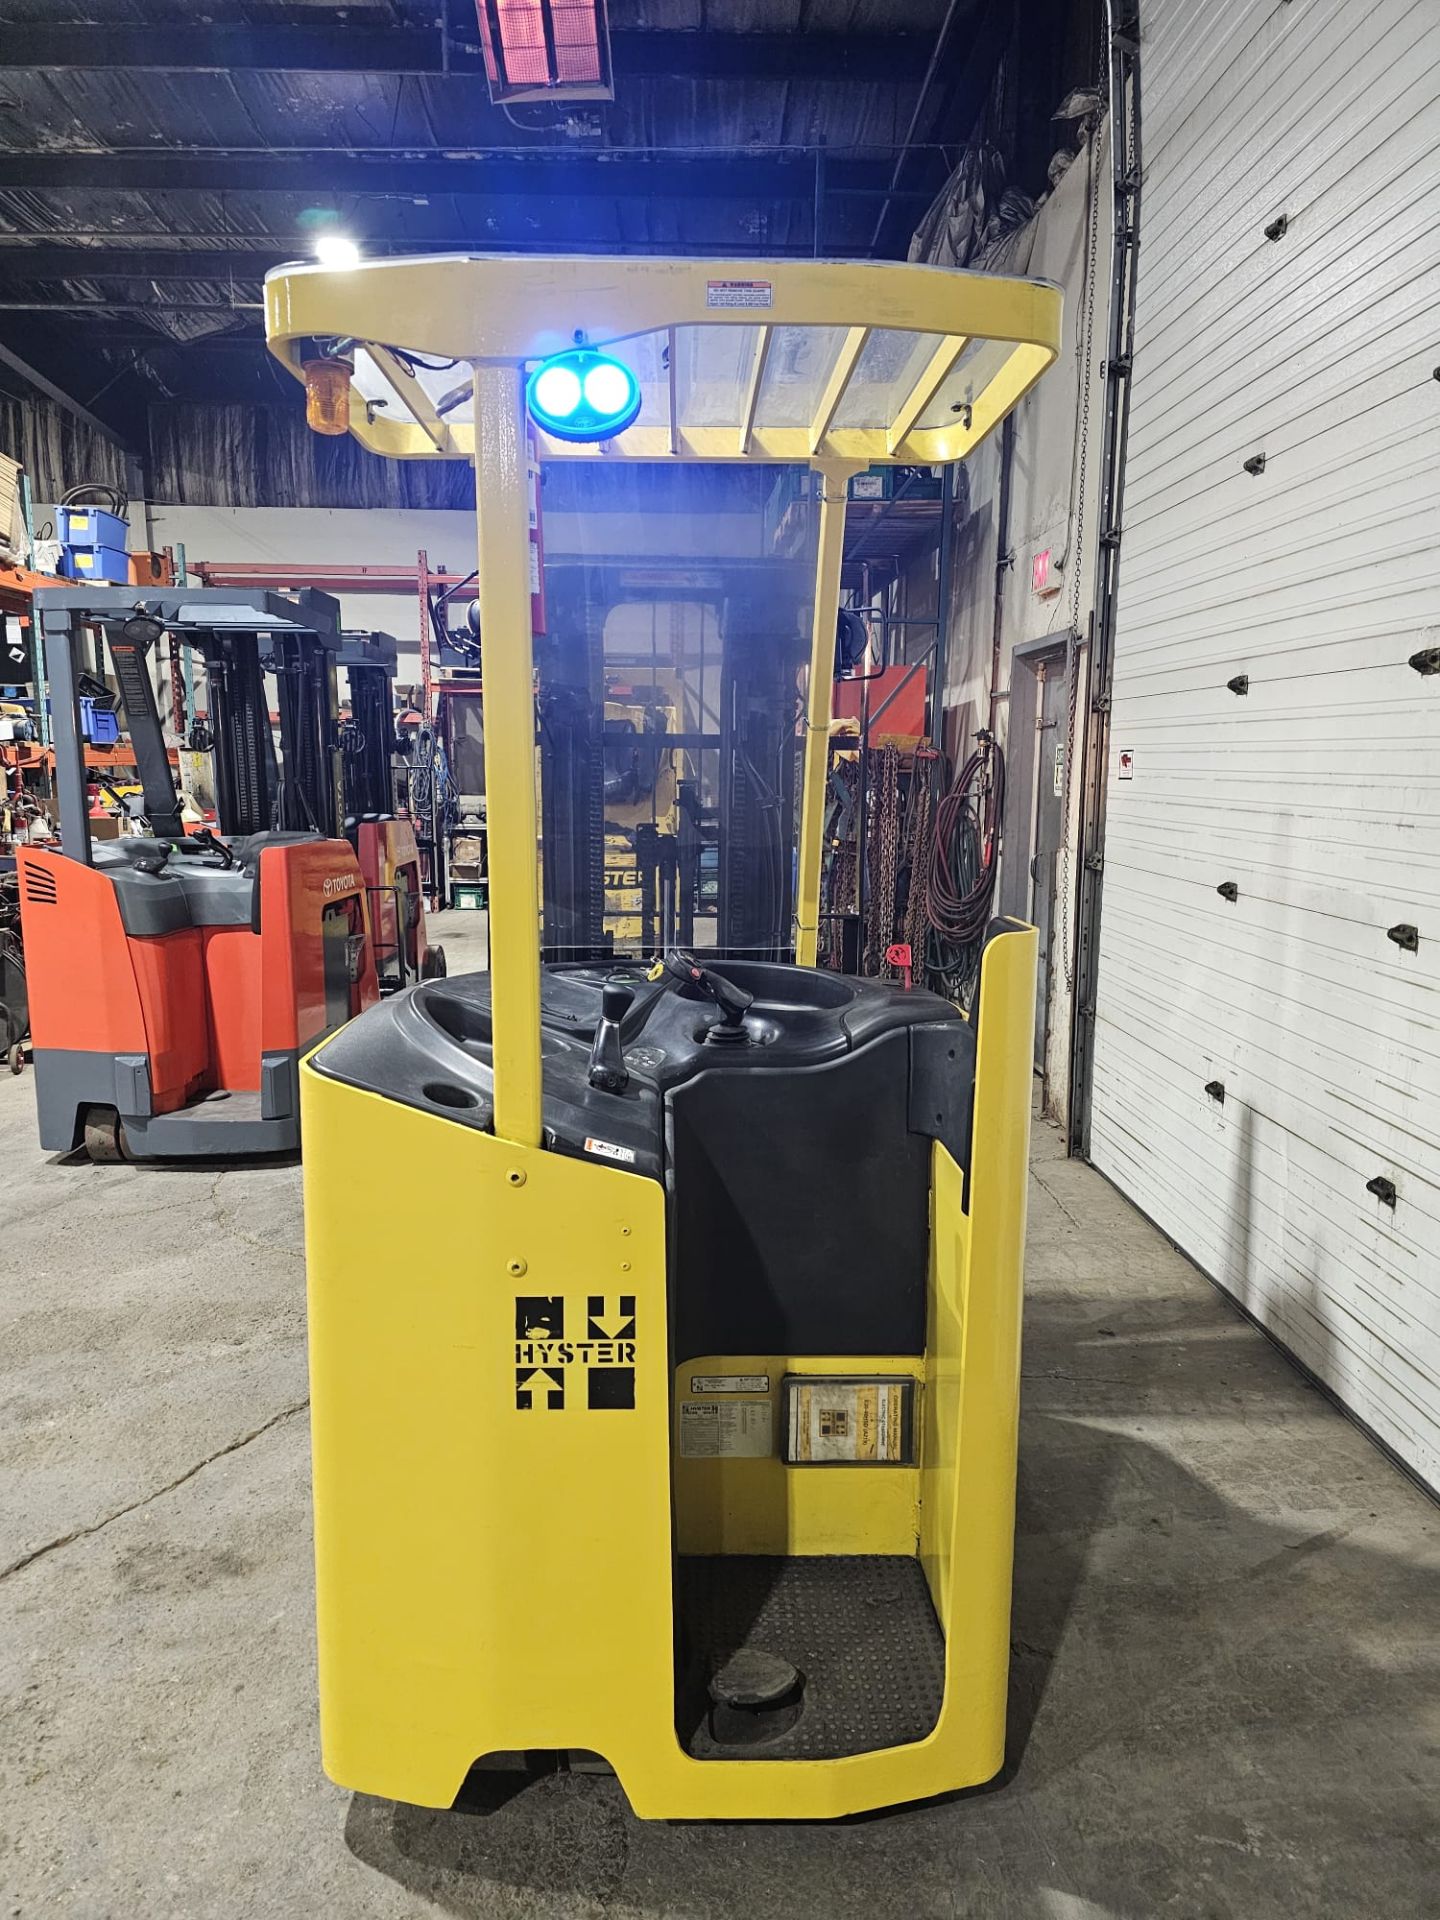 2006 Hyster 3,500lbs Capacity Electric Stand On Forklift 3-STAGE MAST 36V with sideshift & Tires - Image 6 of 8